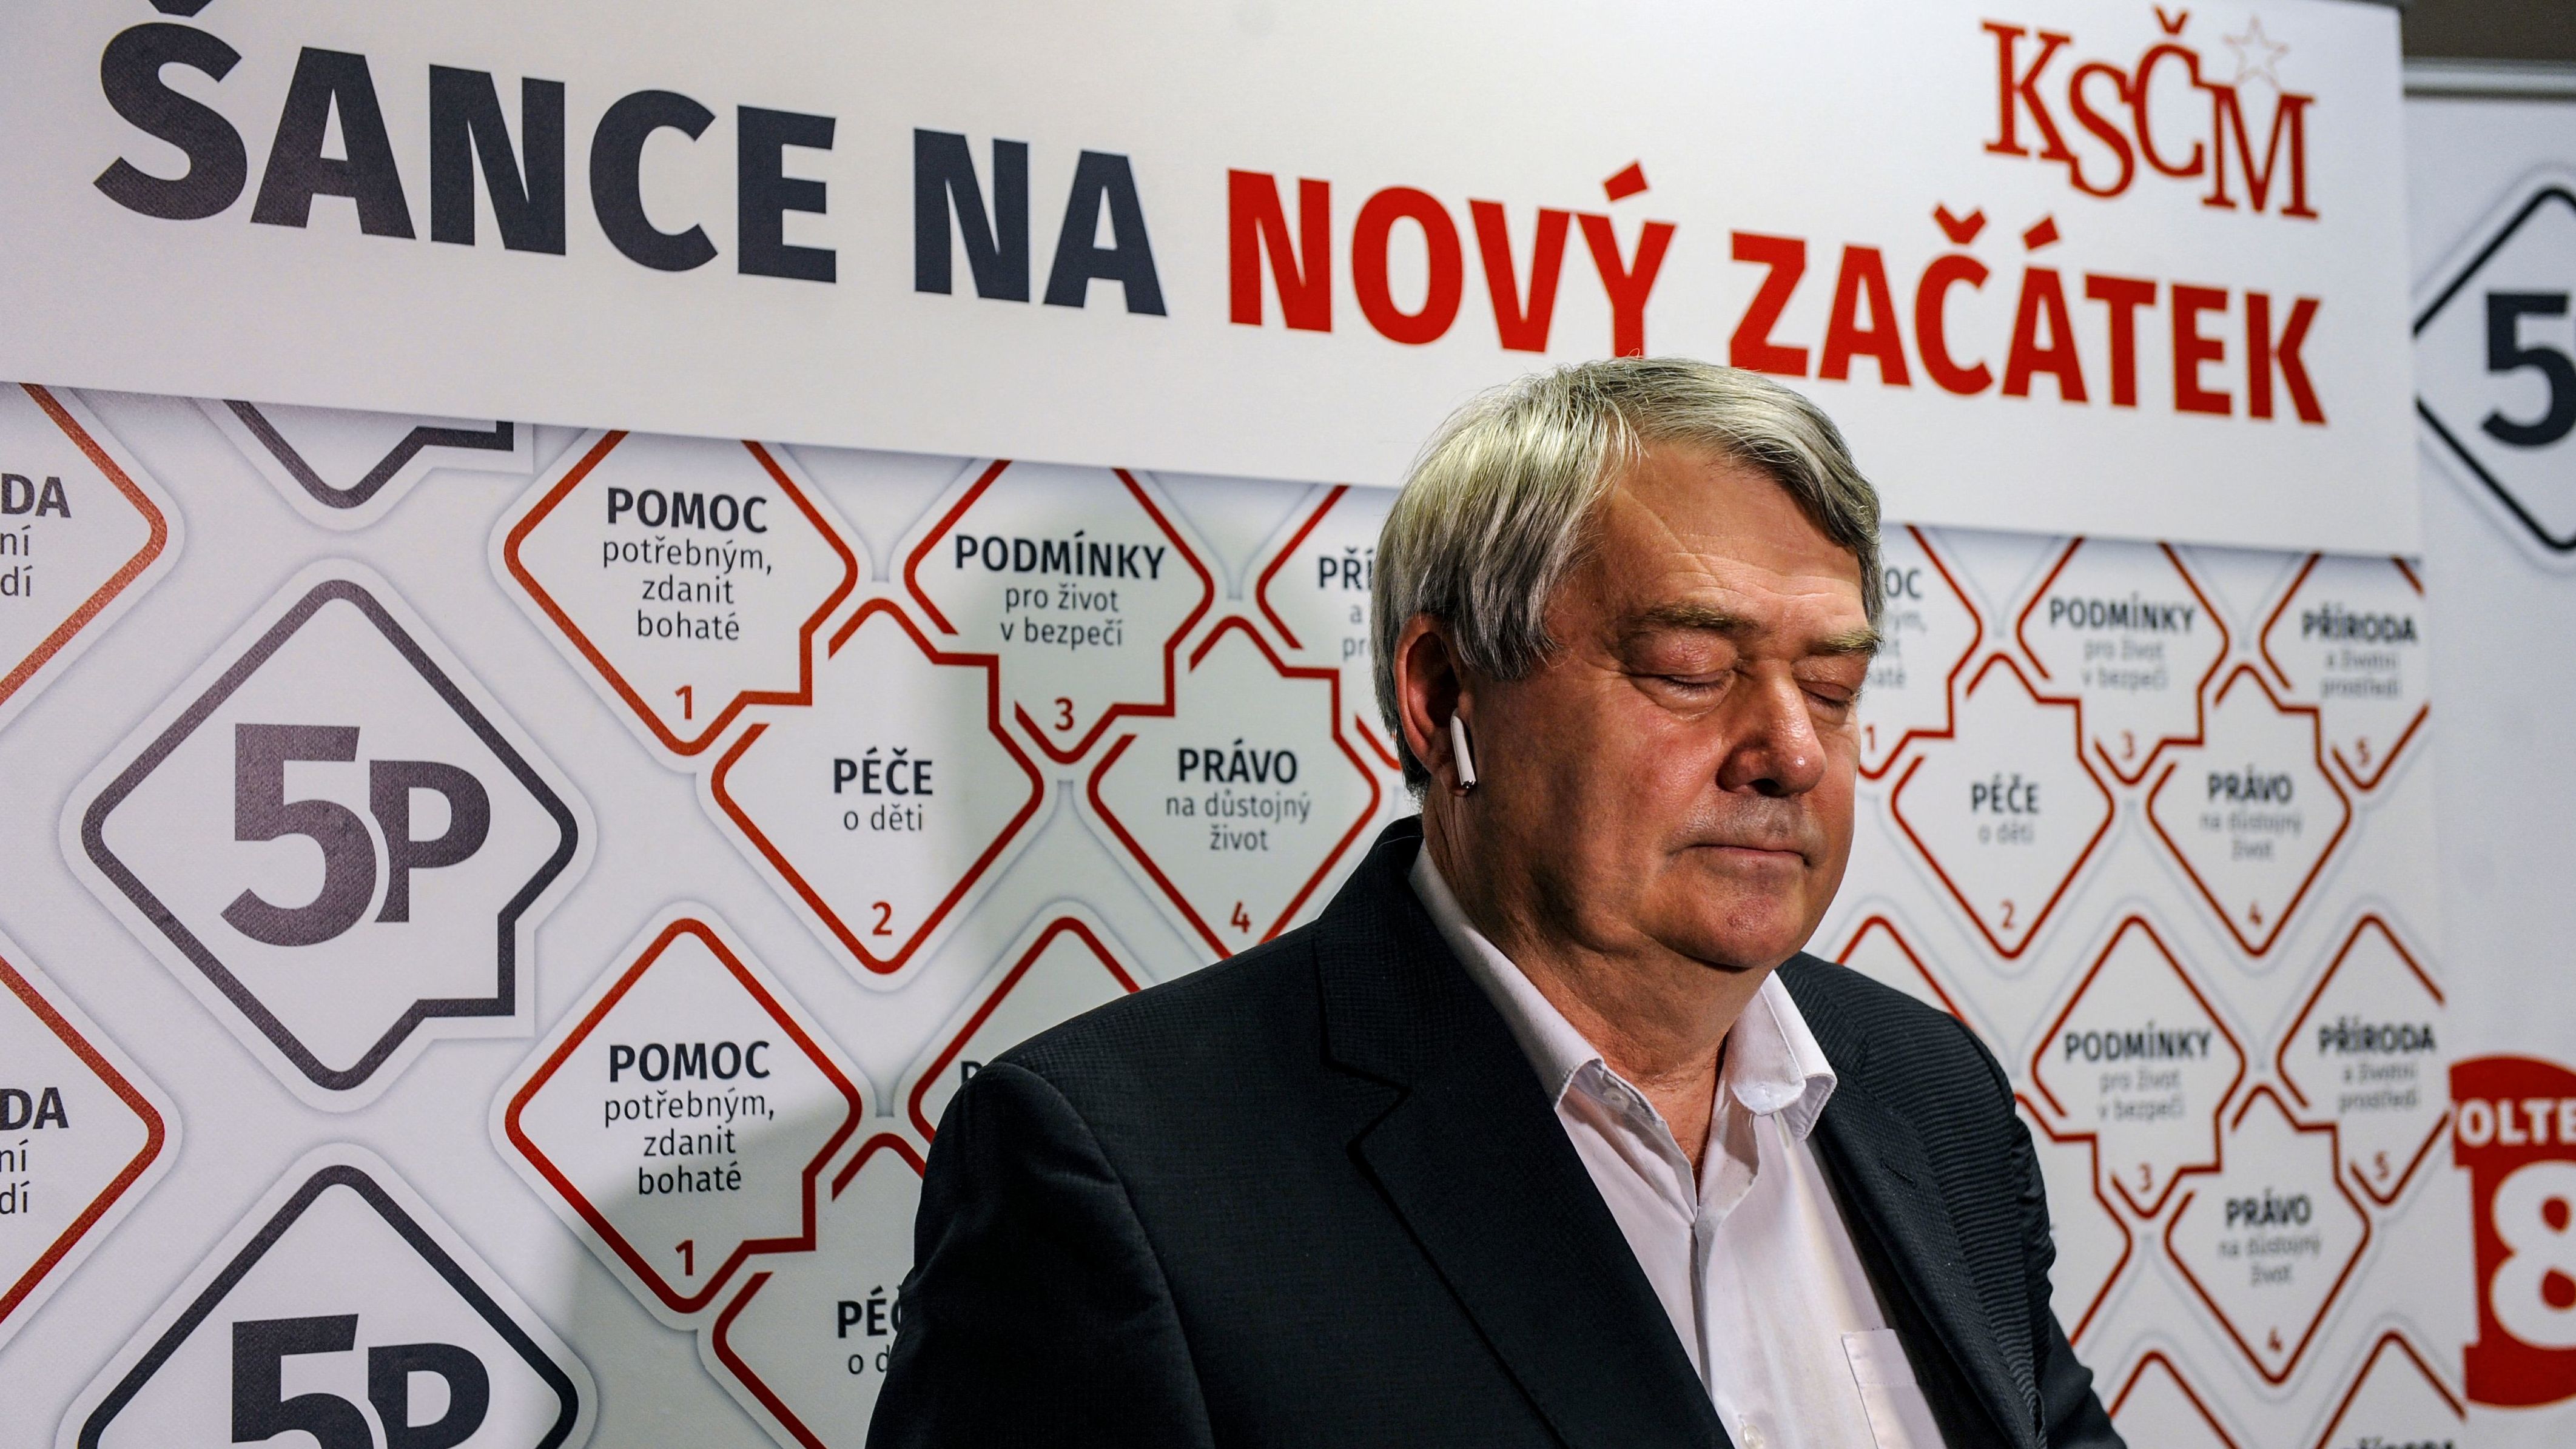 Vojtech Filip, chairman of the Czech Communist Party (KSCM) at a news conference in Prague on October 9, 2021.